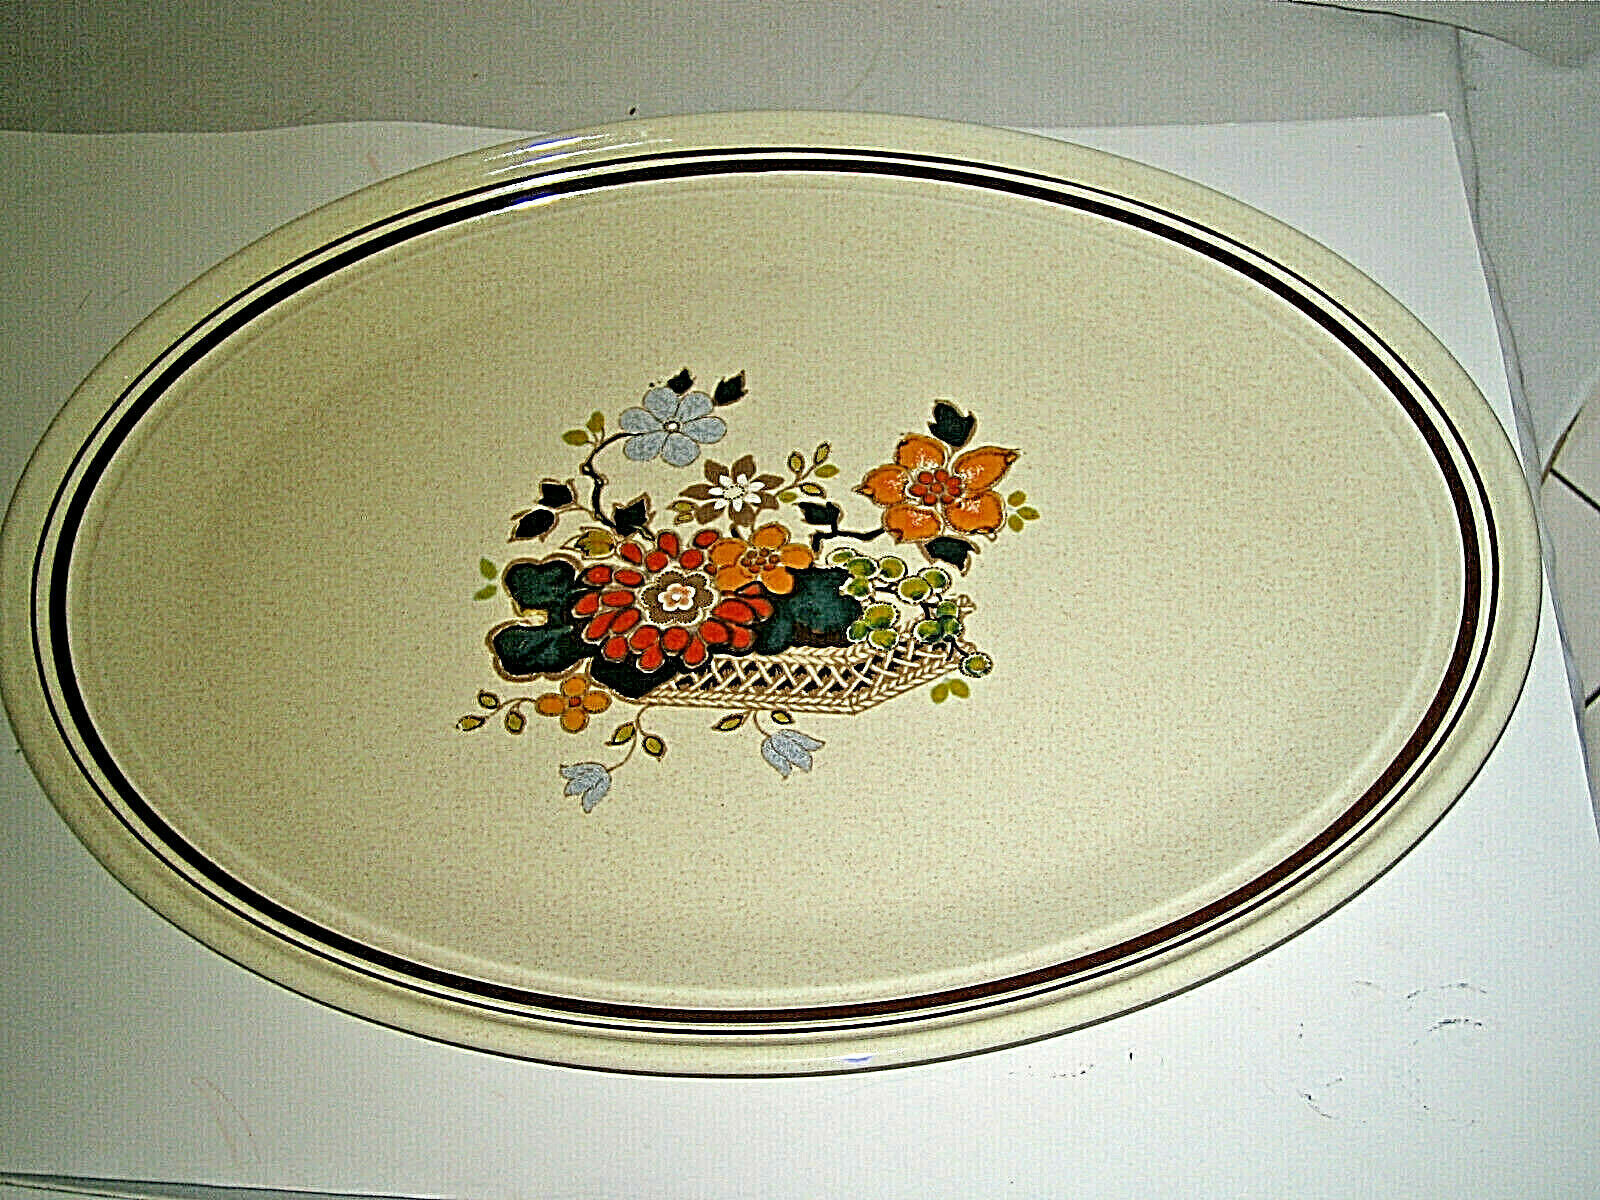 Primary image for Royal Doulton PARADISE GARDEN LS-1041 Oval Serving Platter Large 16 1/2" RARE..